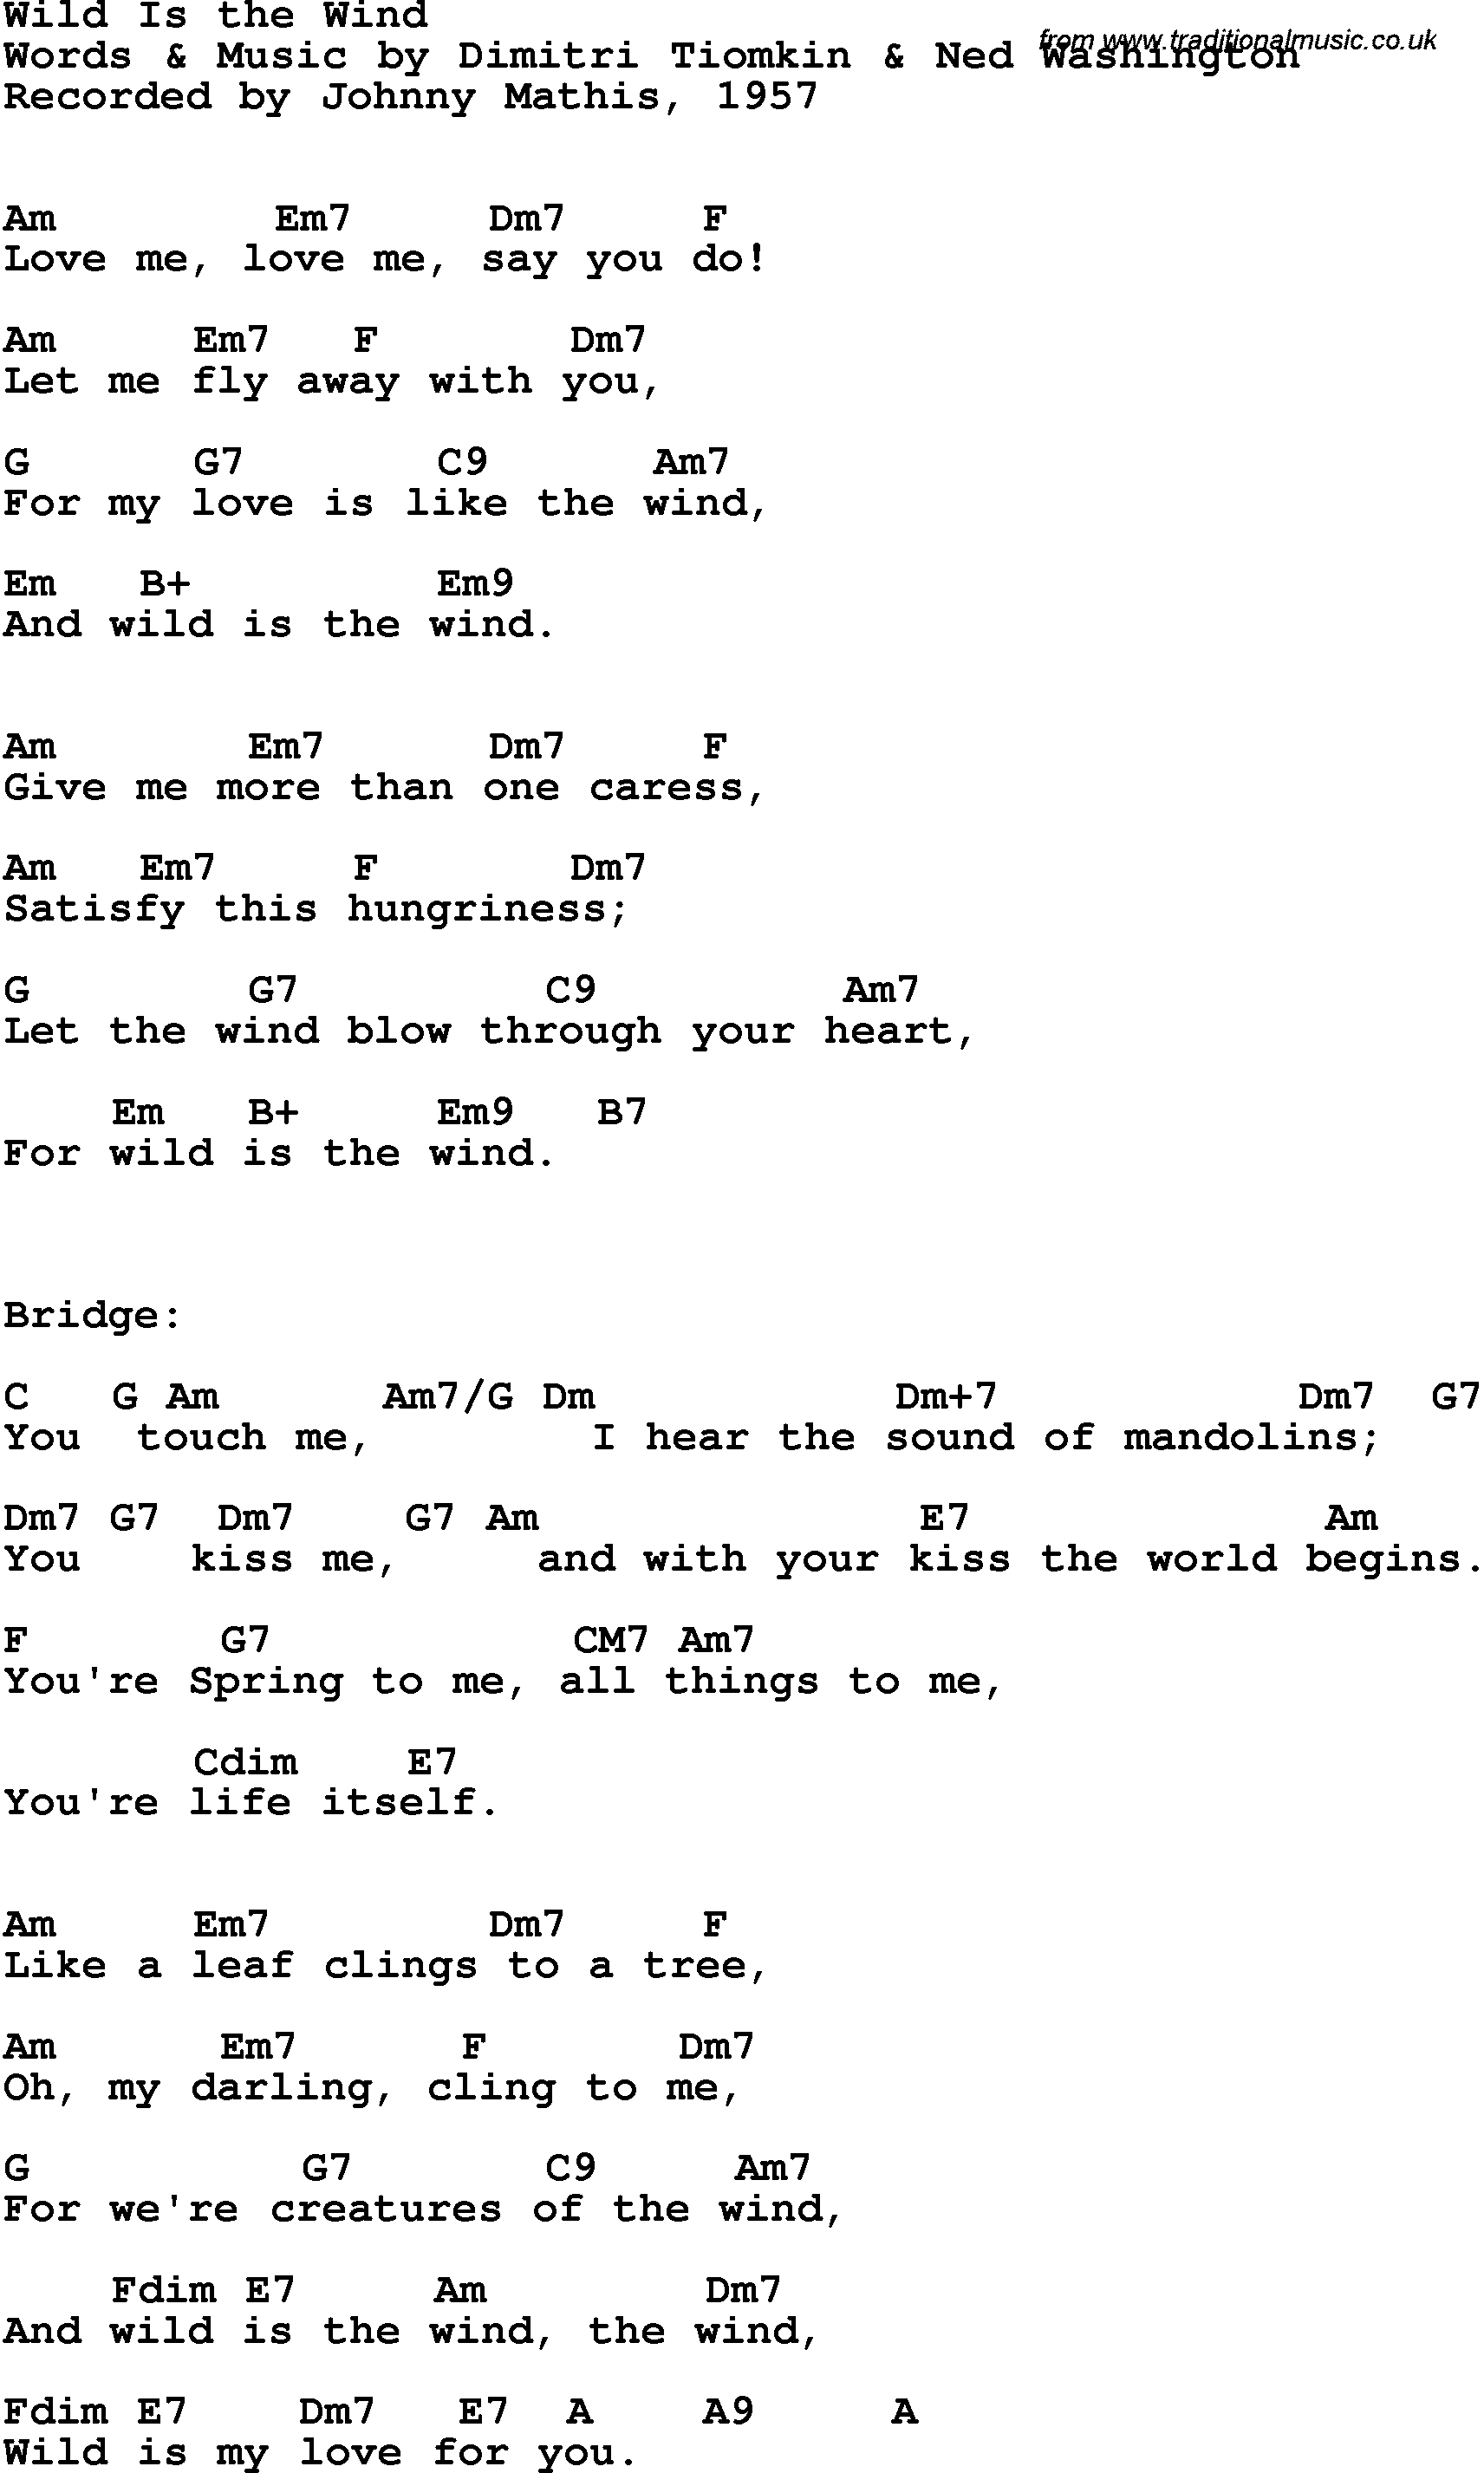 Song Lyrics with guitar chords for Wild Is The Wind - Johnny Mathis, 1957